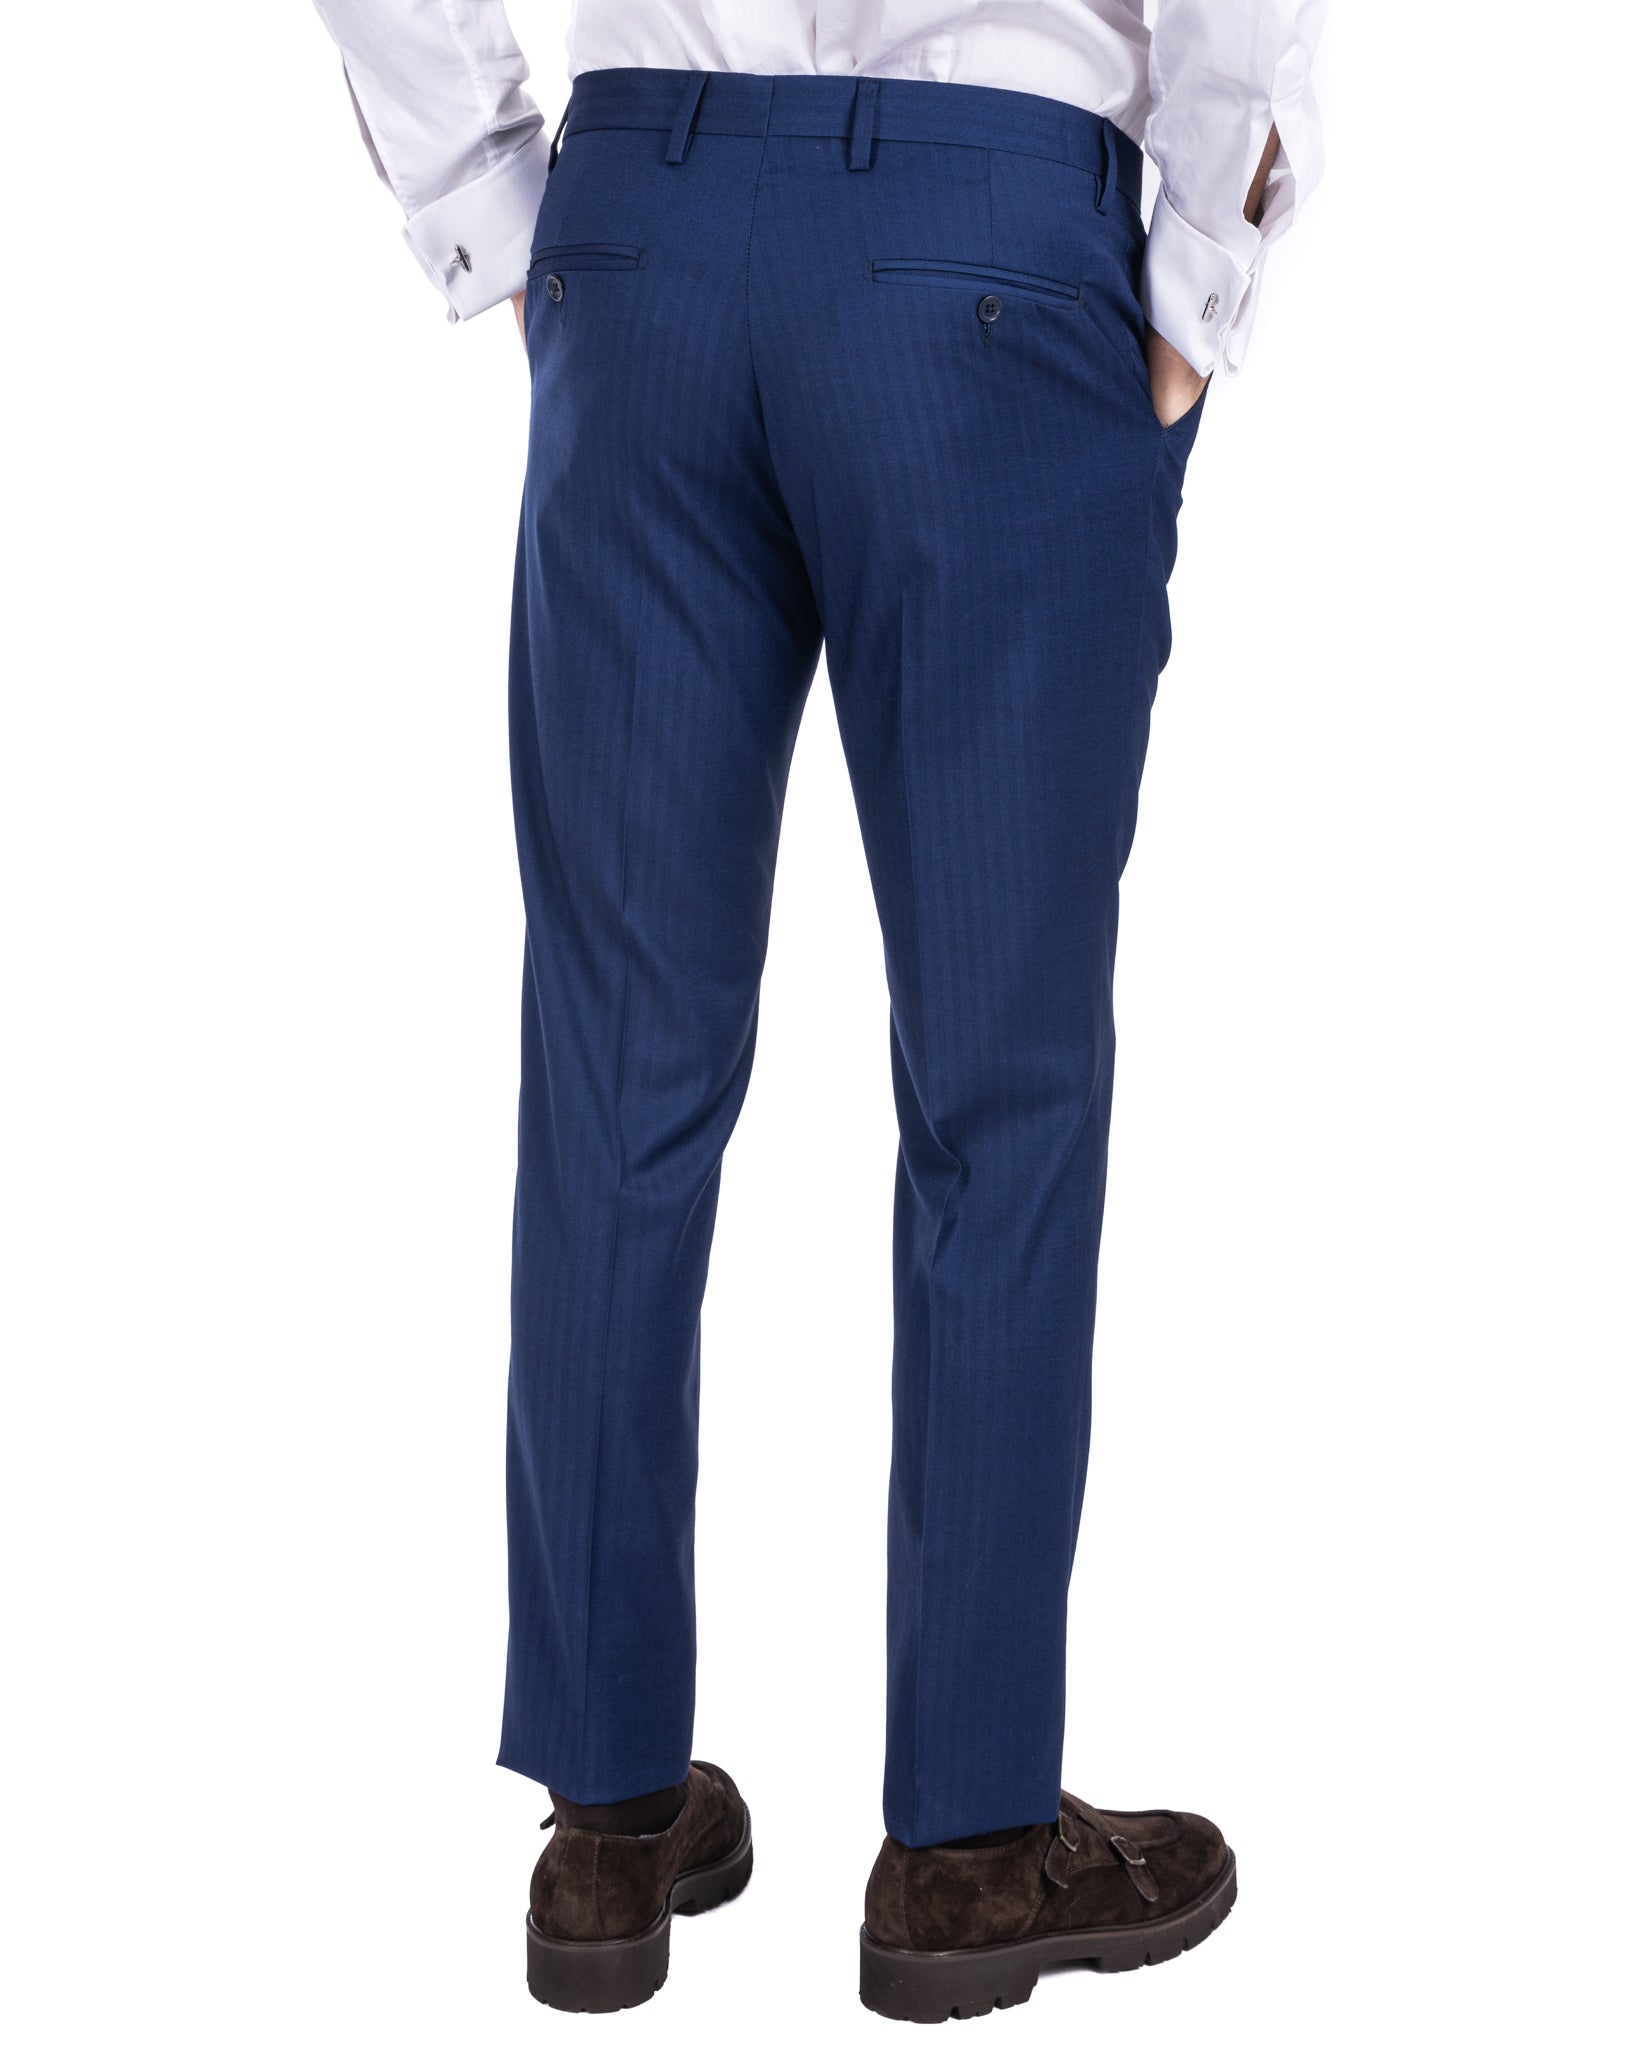 Marseille - blue solaro double-breasted suit with chrome buttons